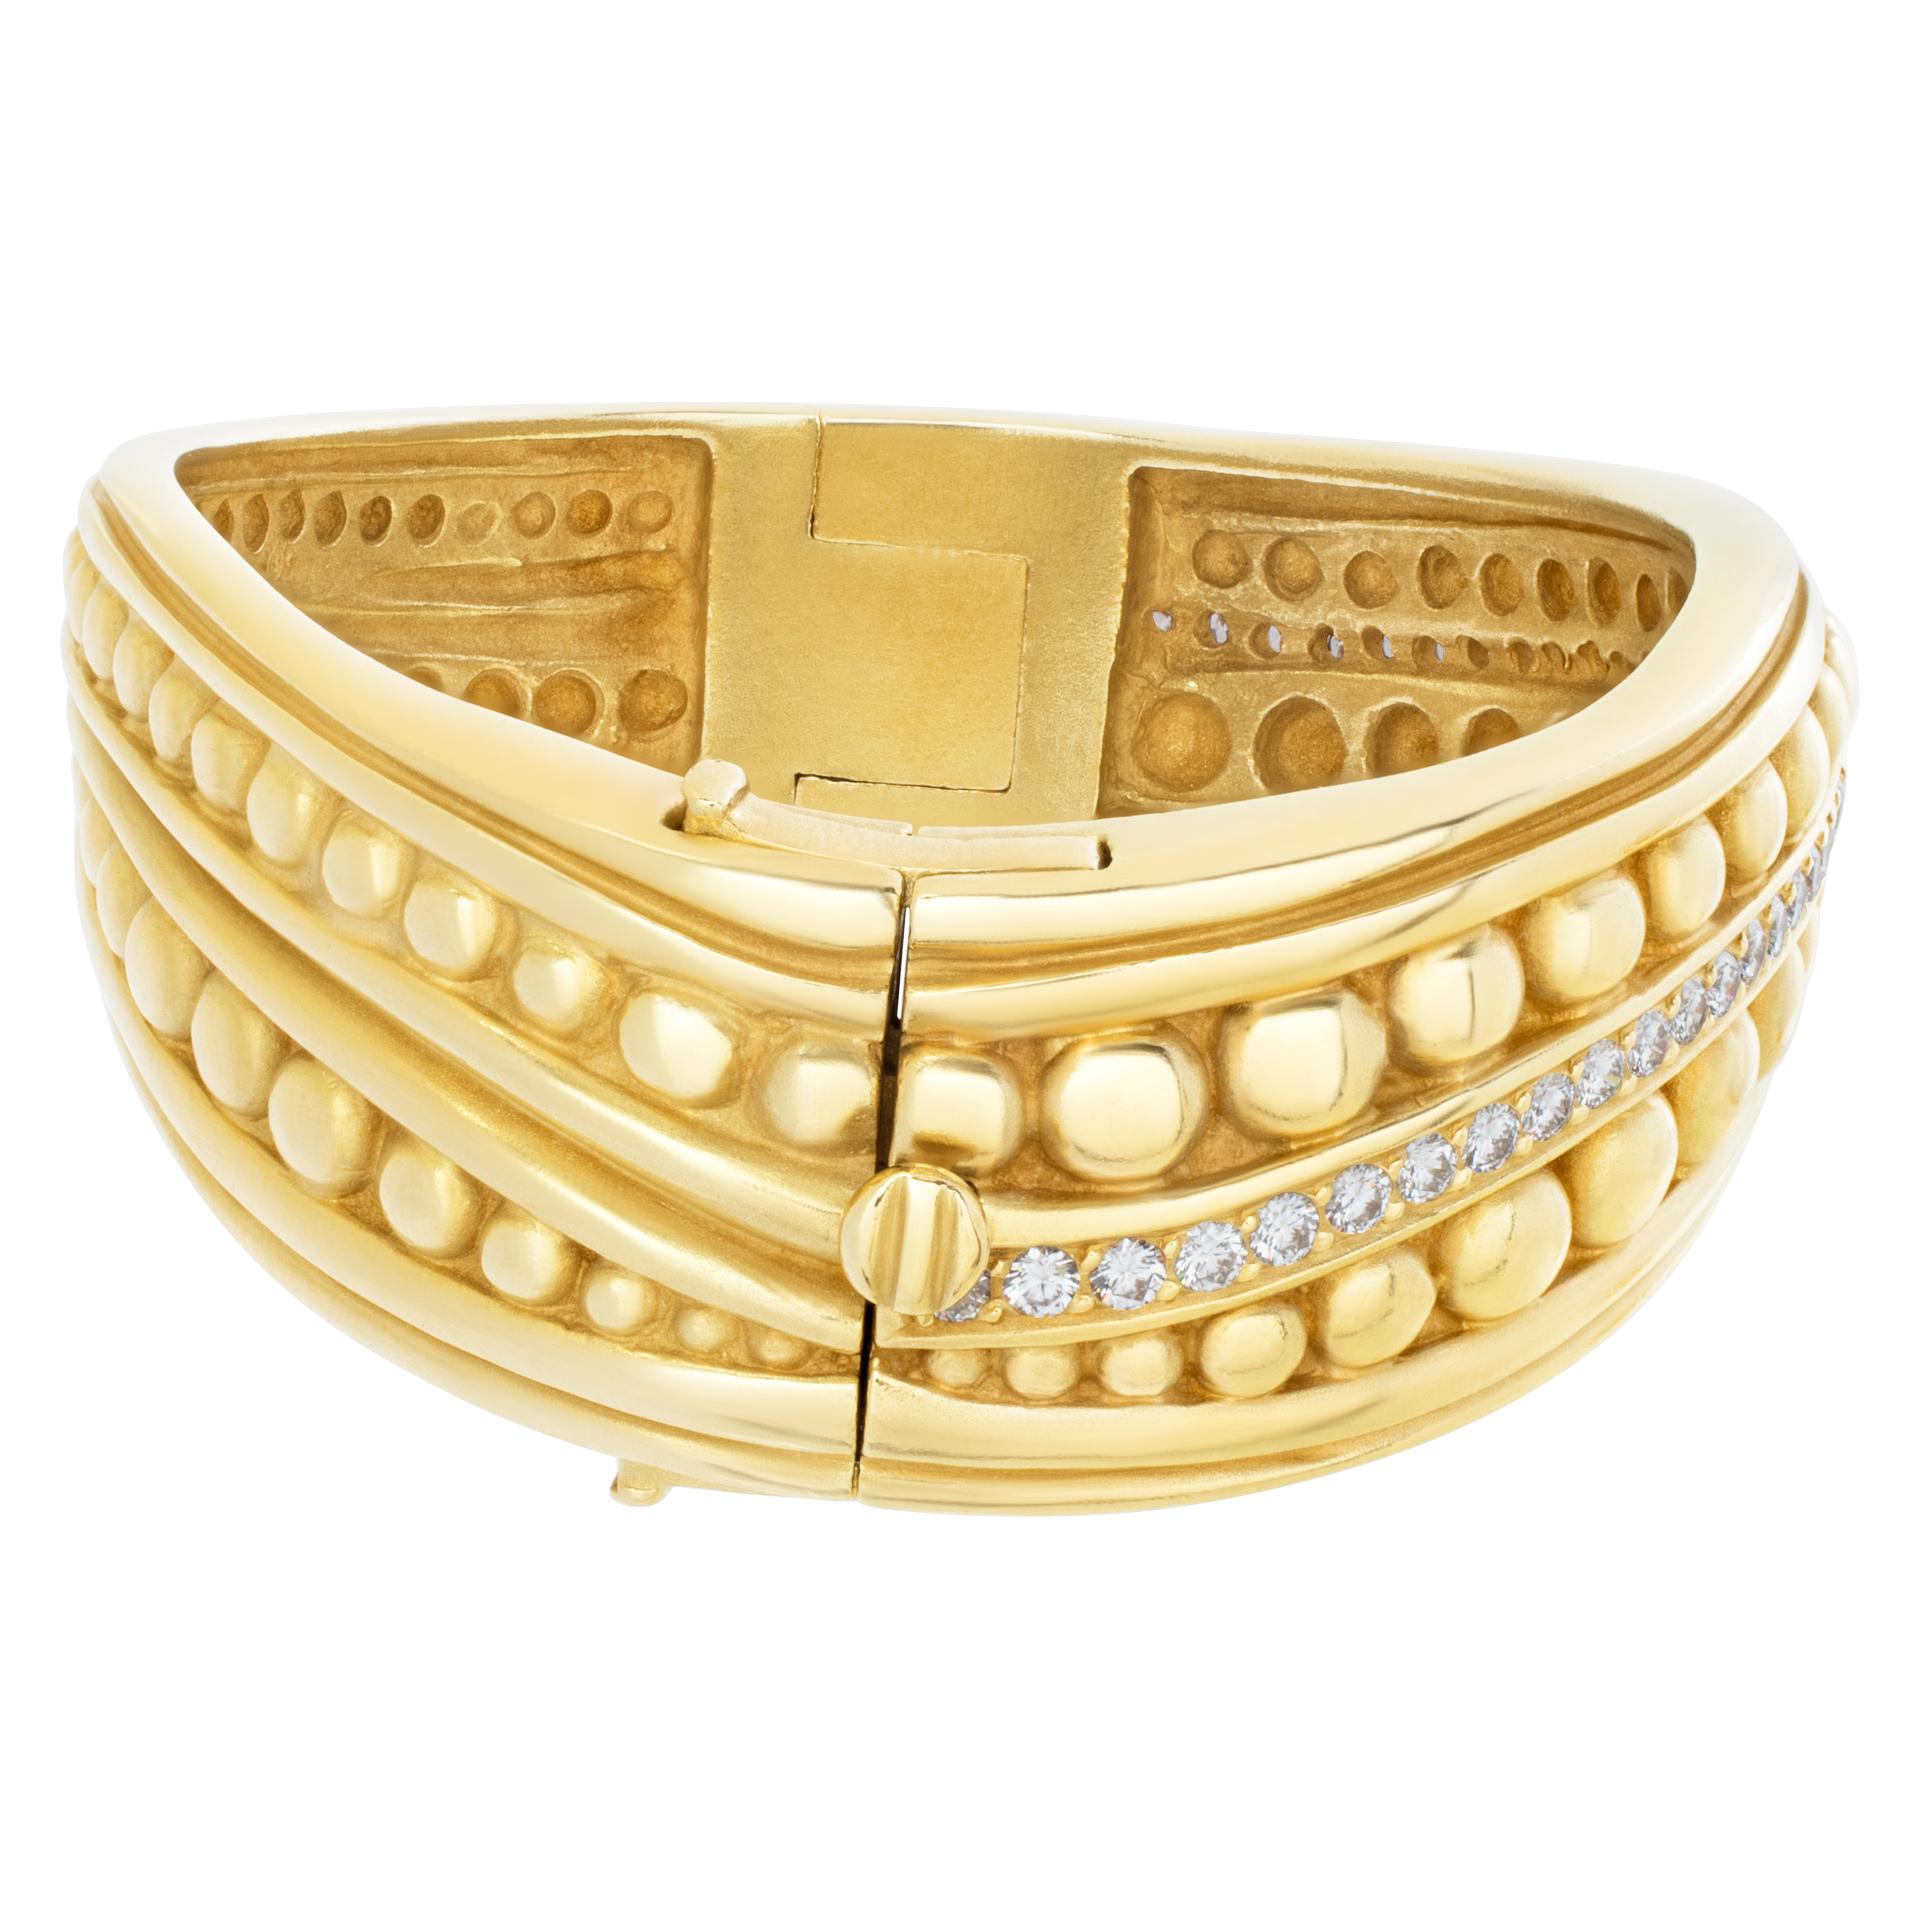 Kieselstein Cord Caviar bangle in 18k yellow gold with over 2 carats in diamonds (G-H color, VS clarity). Large size. Width varies betwen 0.65